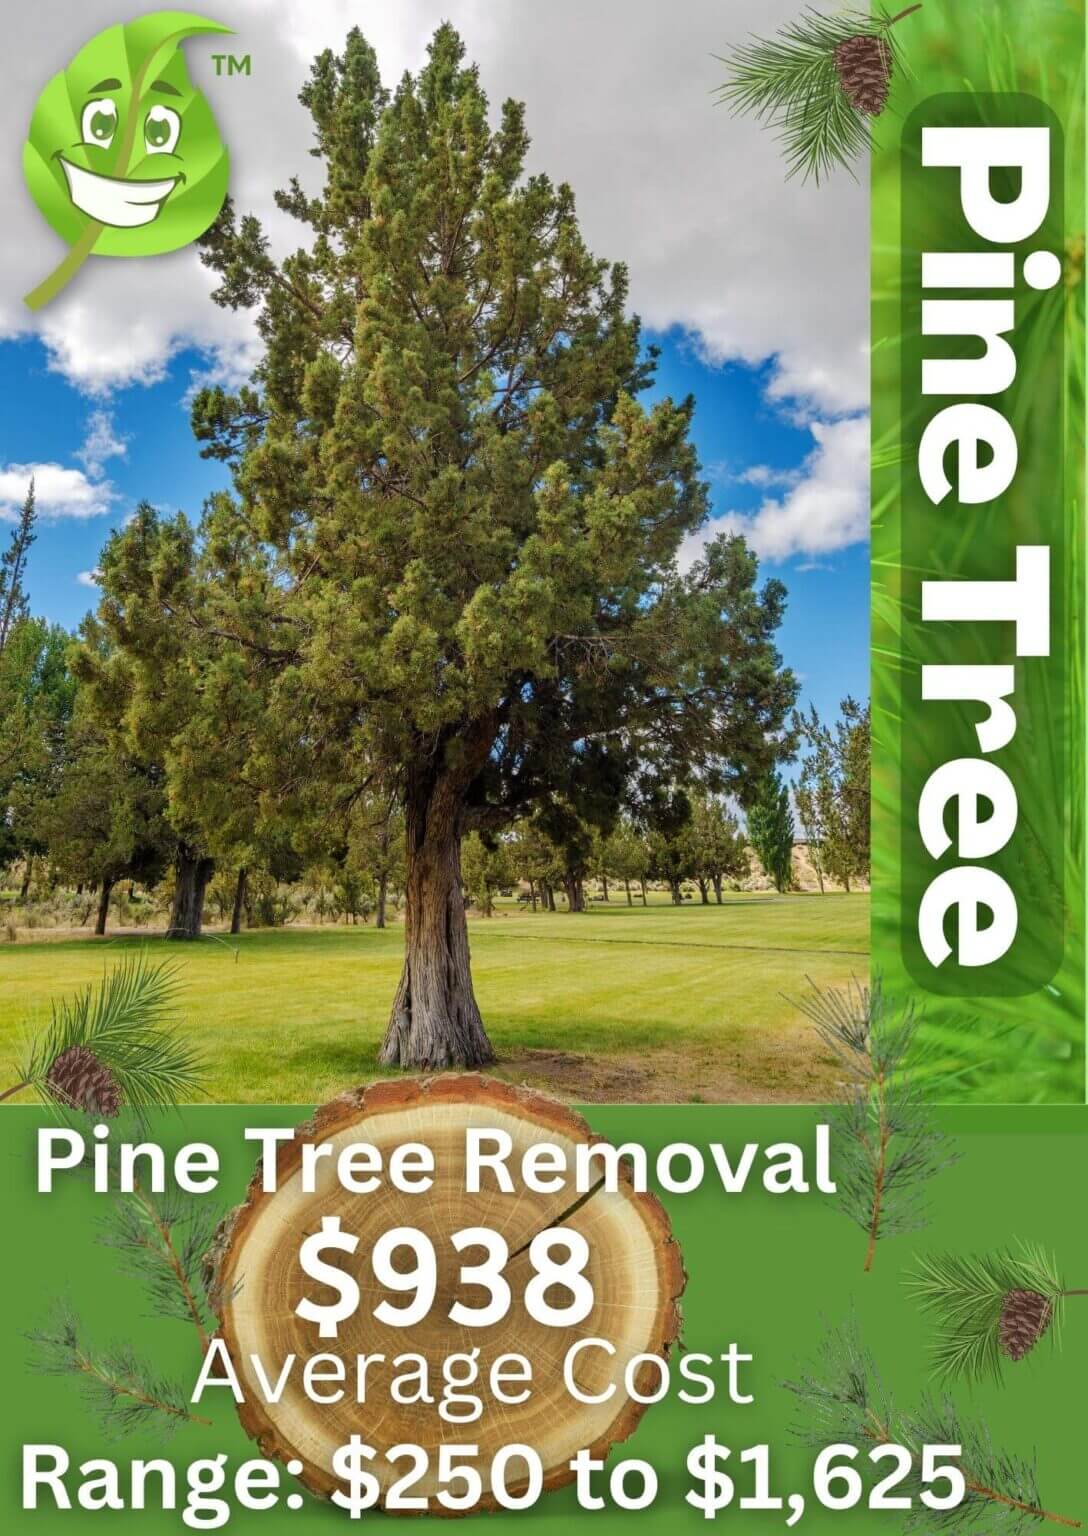 Pine Tree Removal Average Cost in 2023